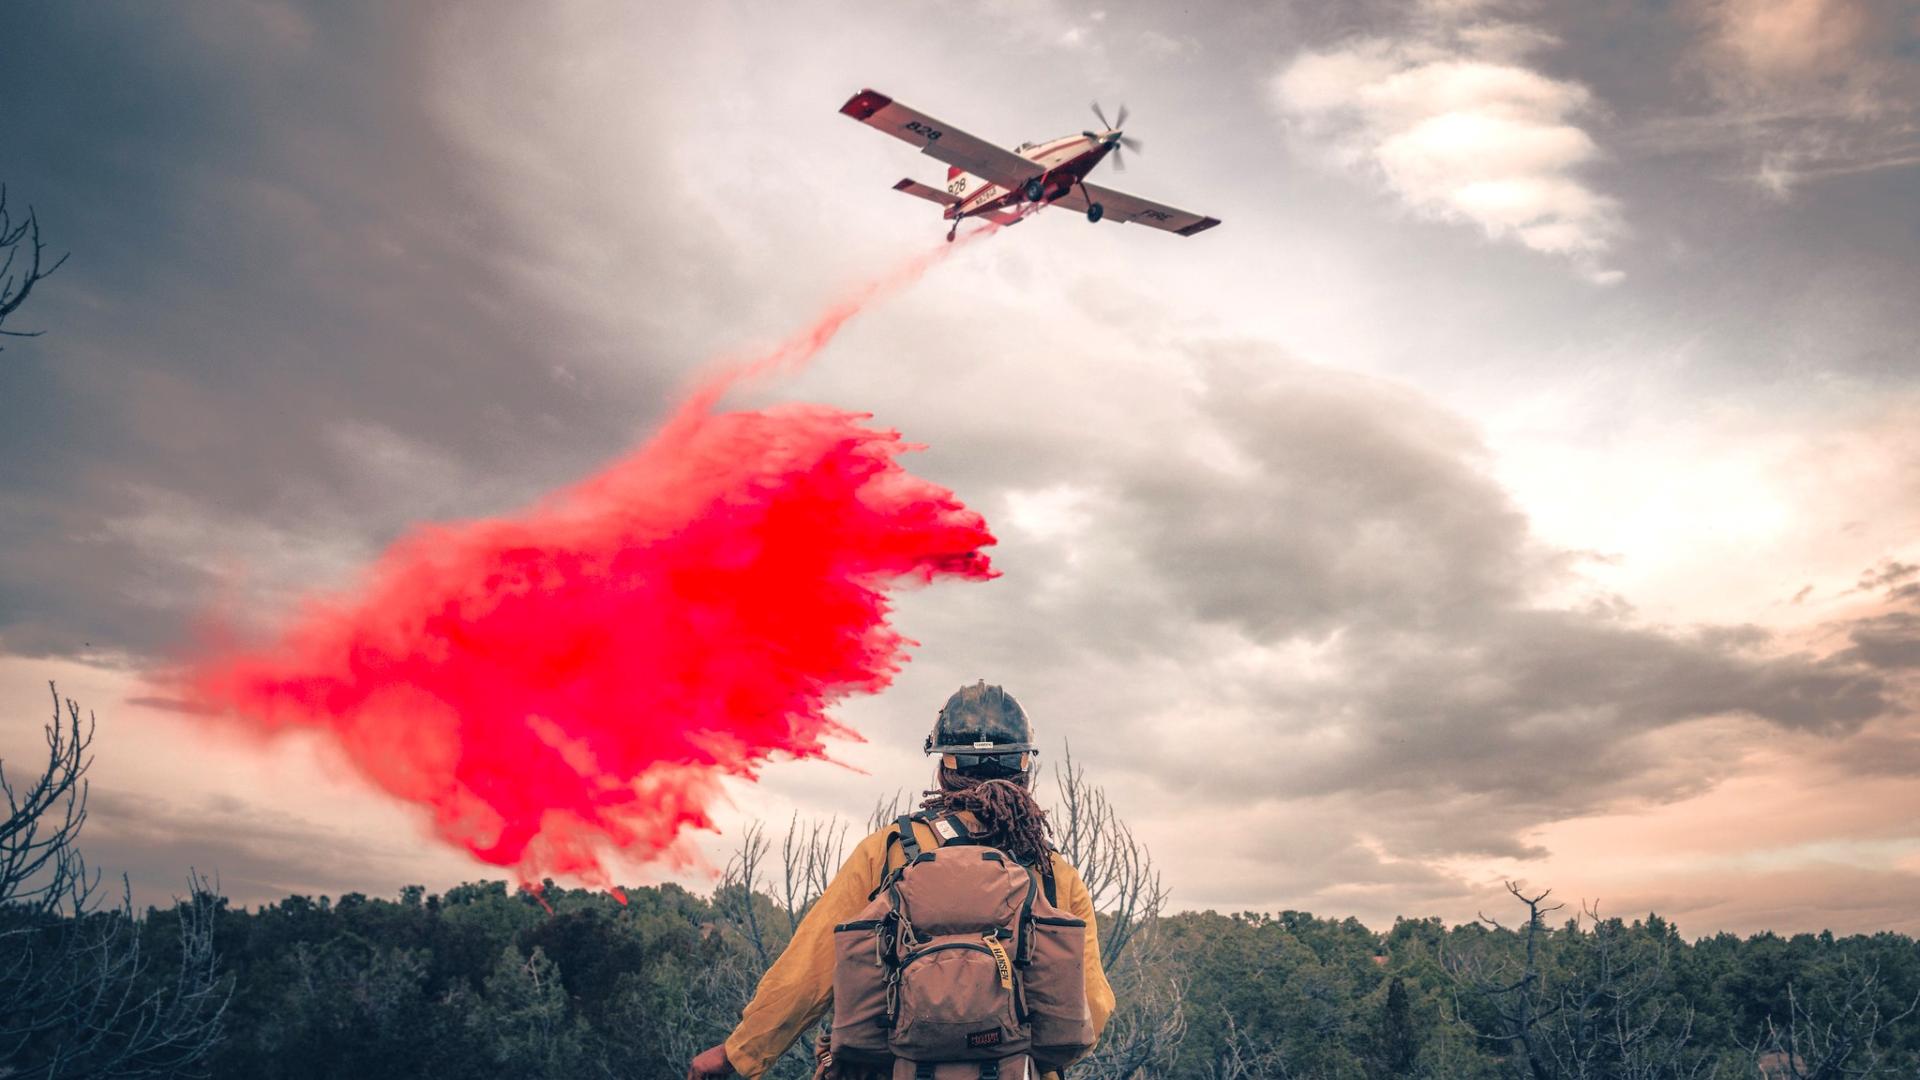 A wildland firefighter watches as a single engine air tanker drops red retardant on a wildfire. The firefighter's back is to the viewer as the plane flies overhead, with smoke and clouds in the background. BLM photo. 